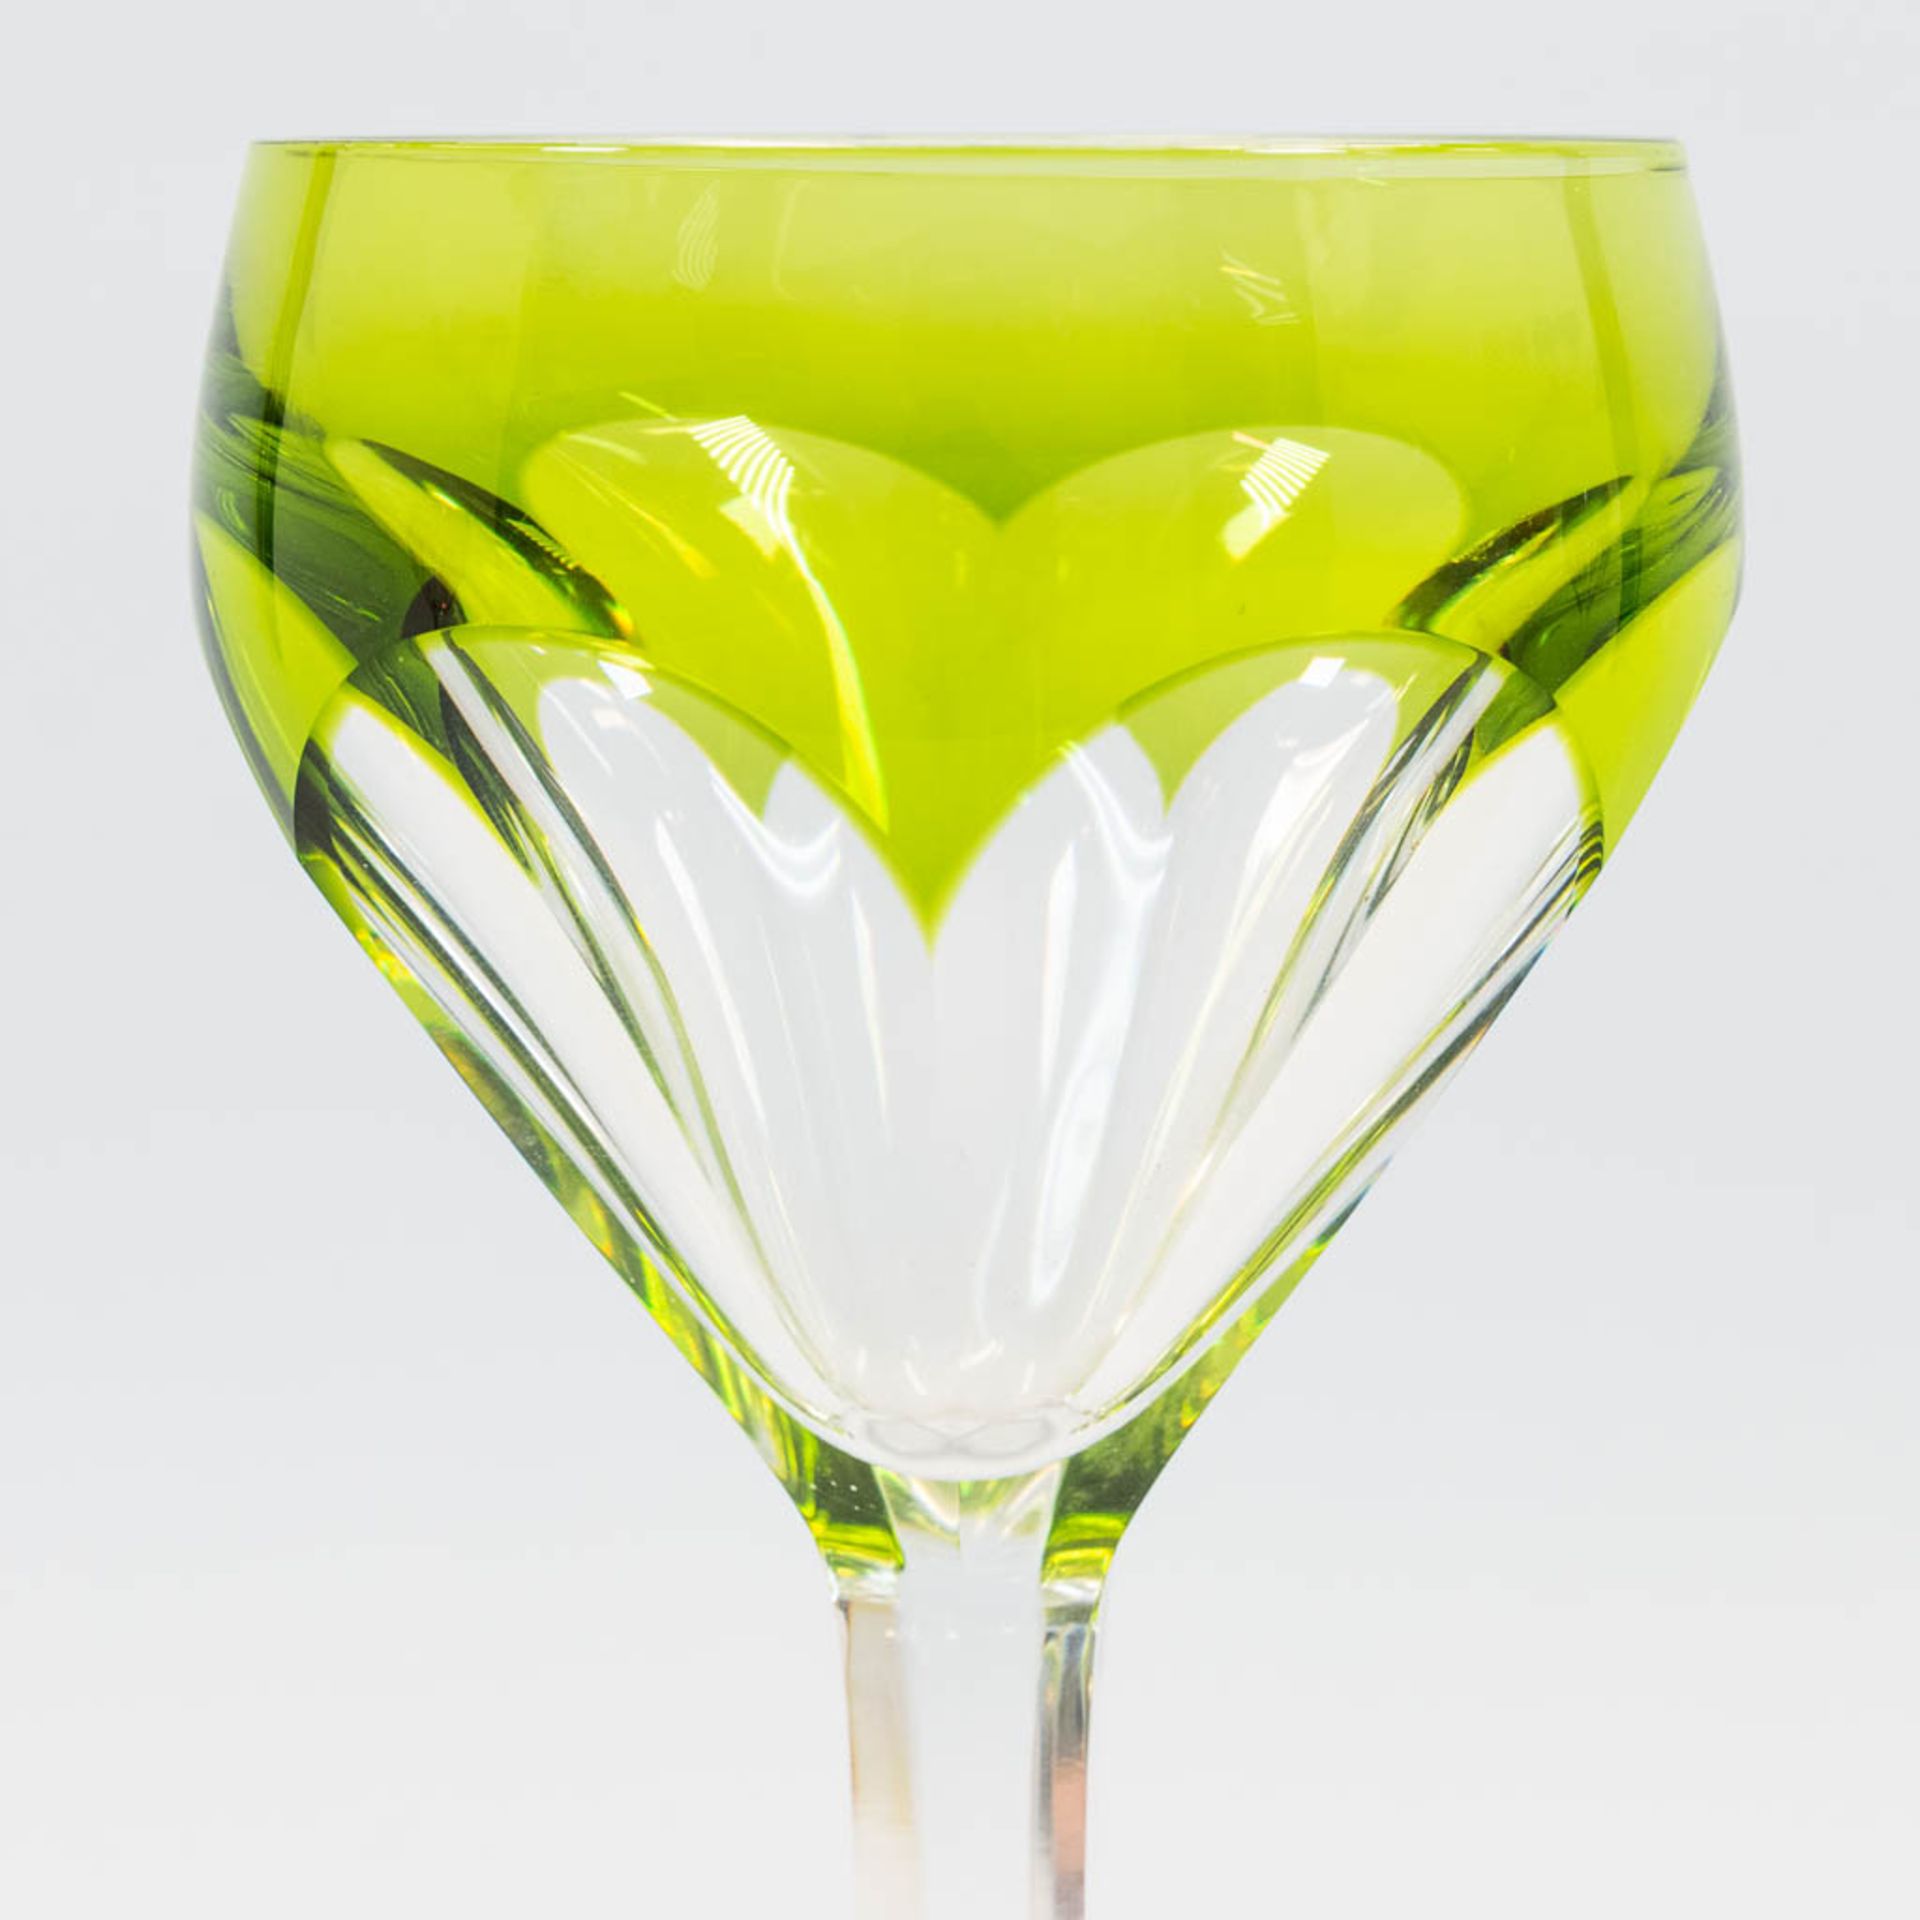 A collection of 5 cut crystal glasses in bright colours, made by Val Saint Lambert. (19 x 8 cm) - Image 6 of 12